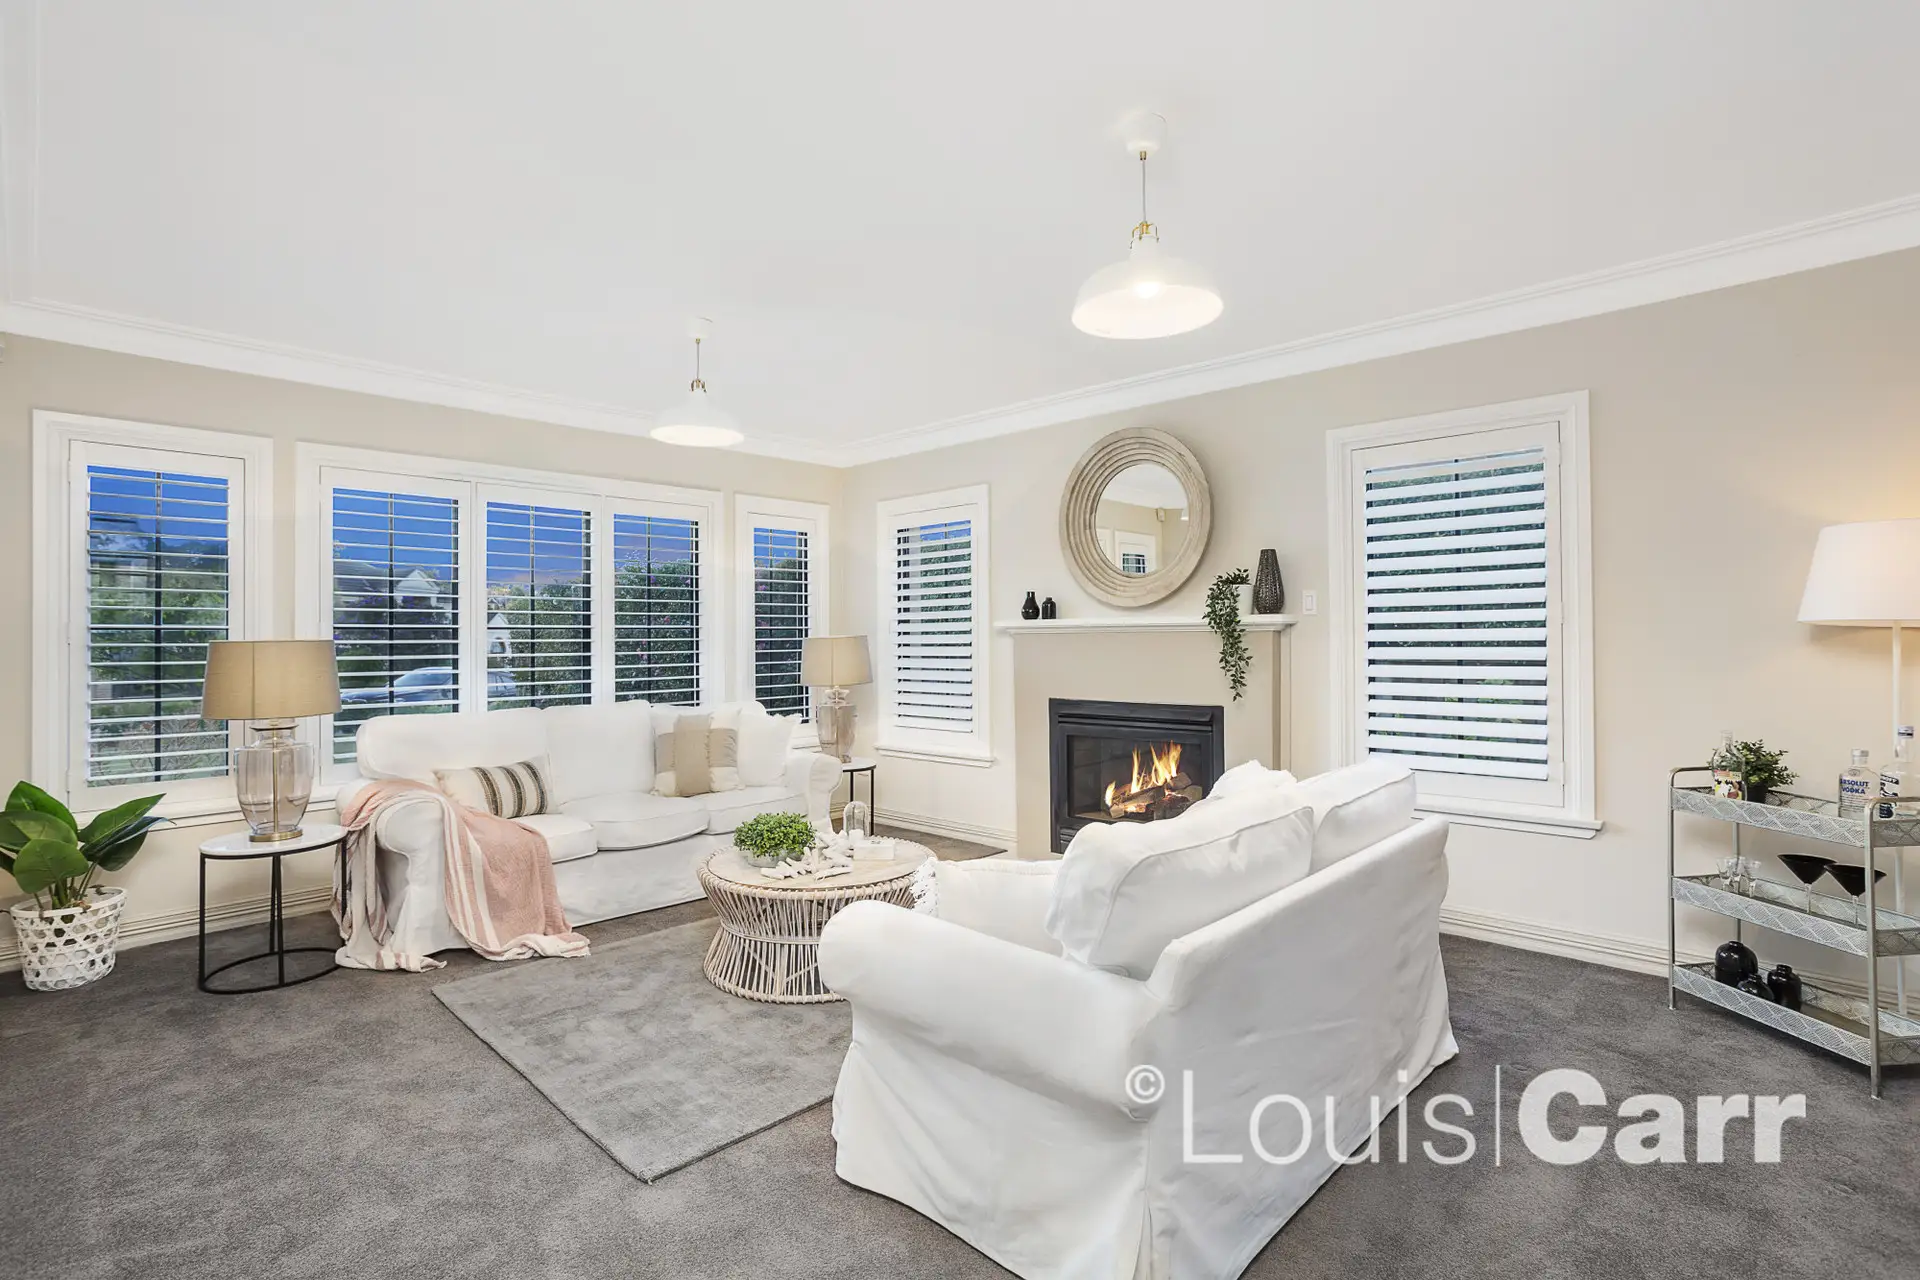 Photo #4: 17 Kambah Place, West Pennant Hills - Sold by Louis Carr Real Estate